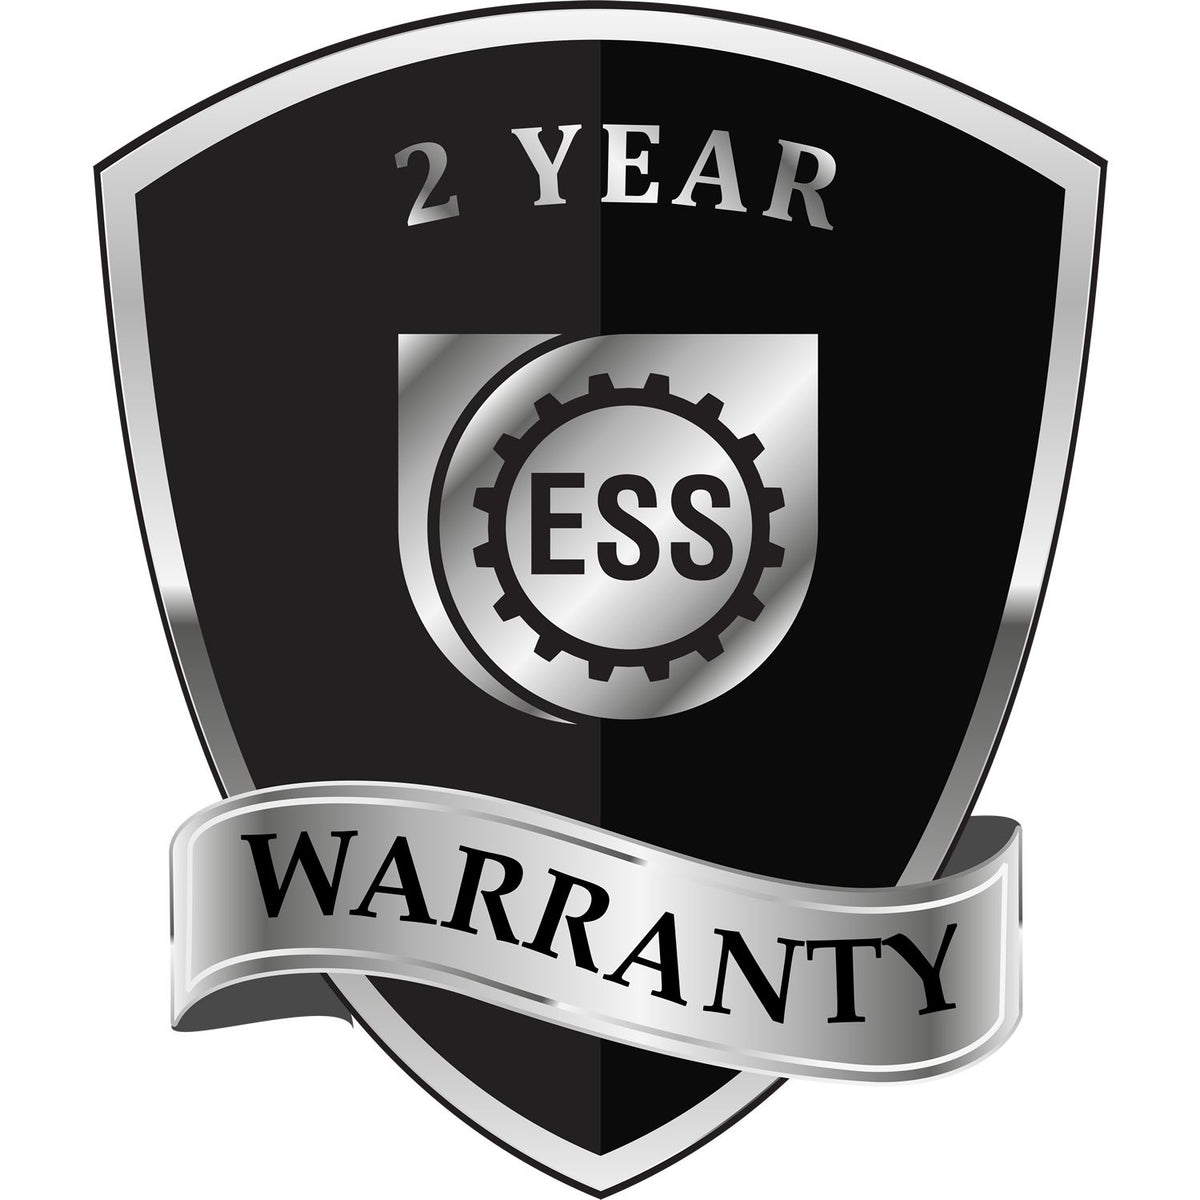 A badge or emblem showing a warranty icon for the State of Vermont Extended Long Reach Engineer Seal